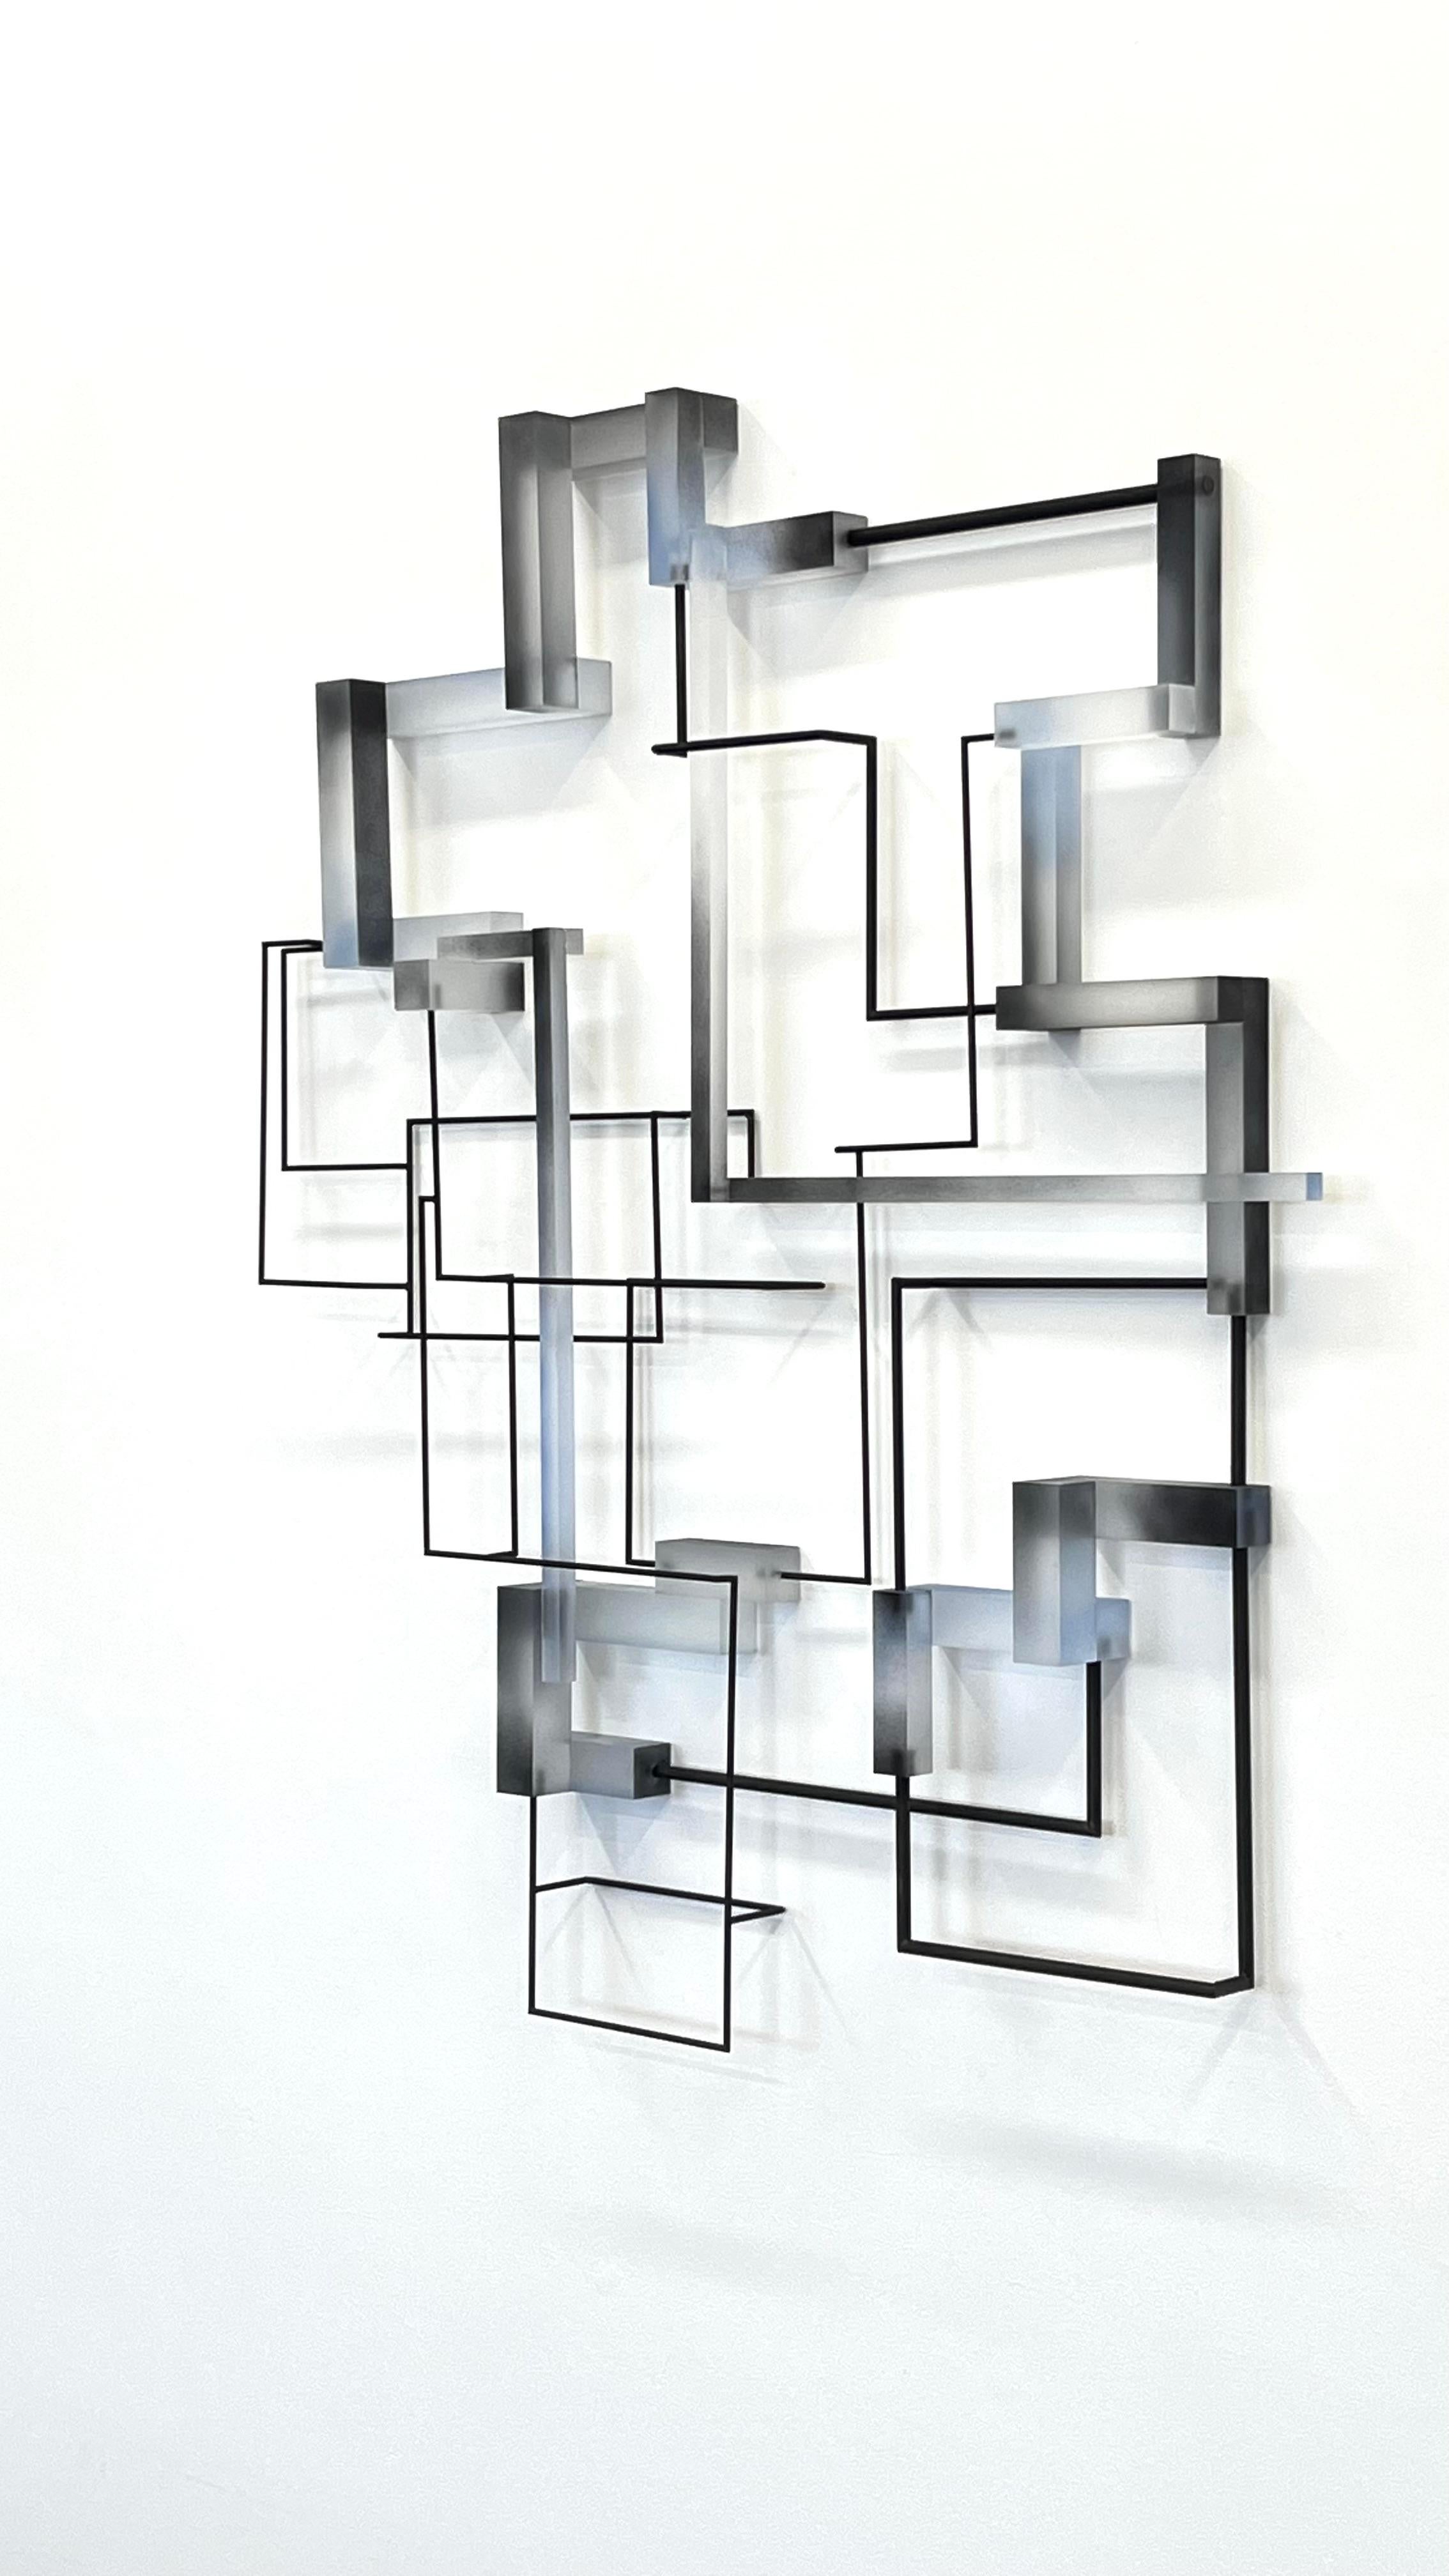 Vanguard : contemporary modern abstract geometric sculpture - Abstract Geometric Sculpture by Greg Chann